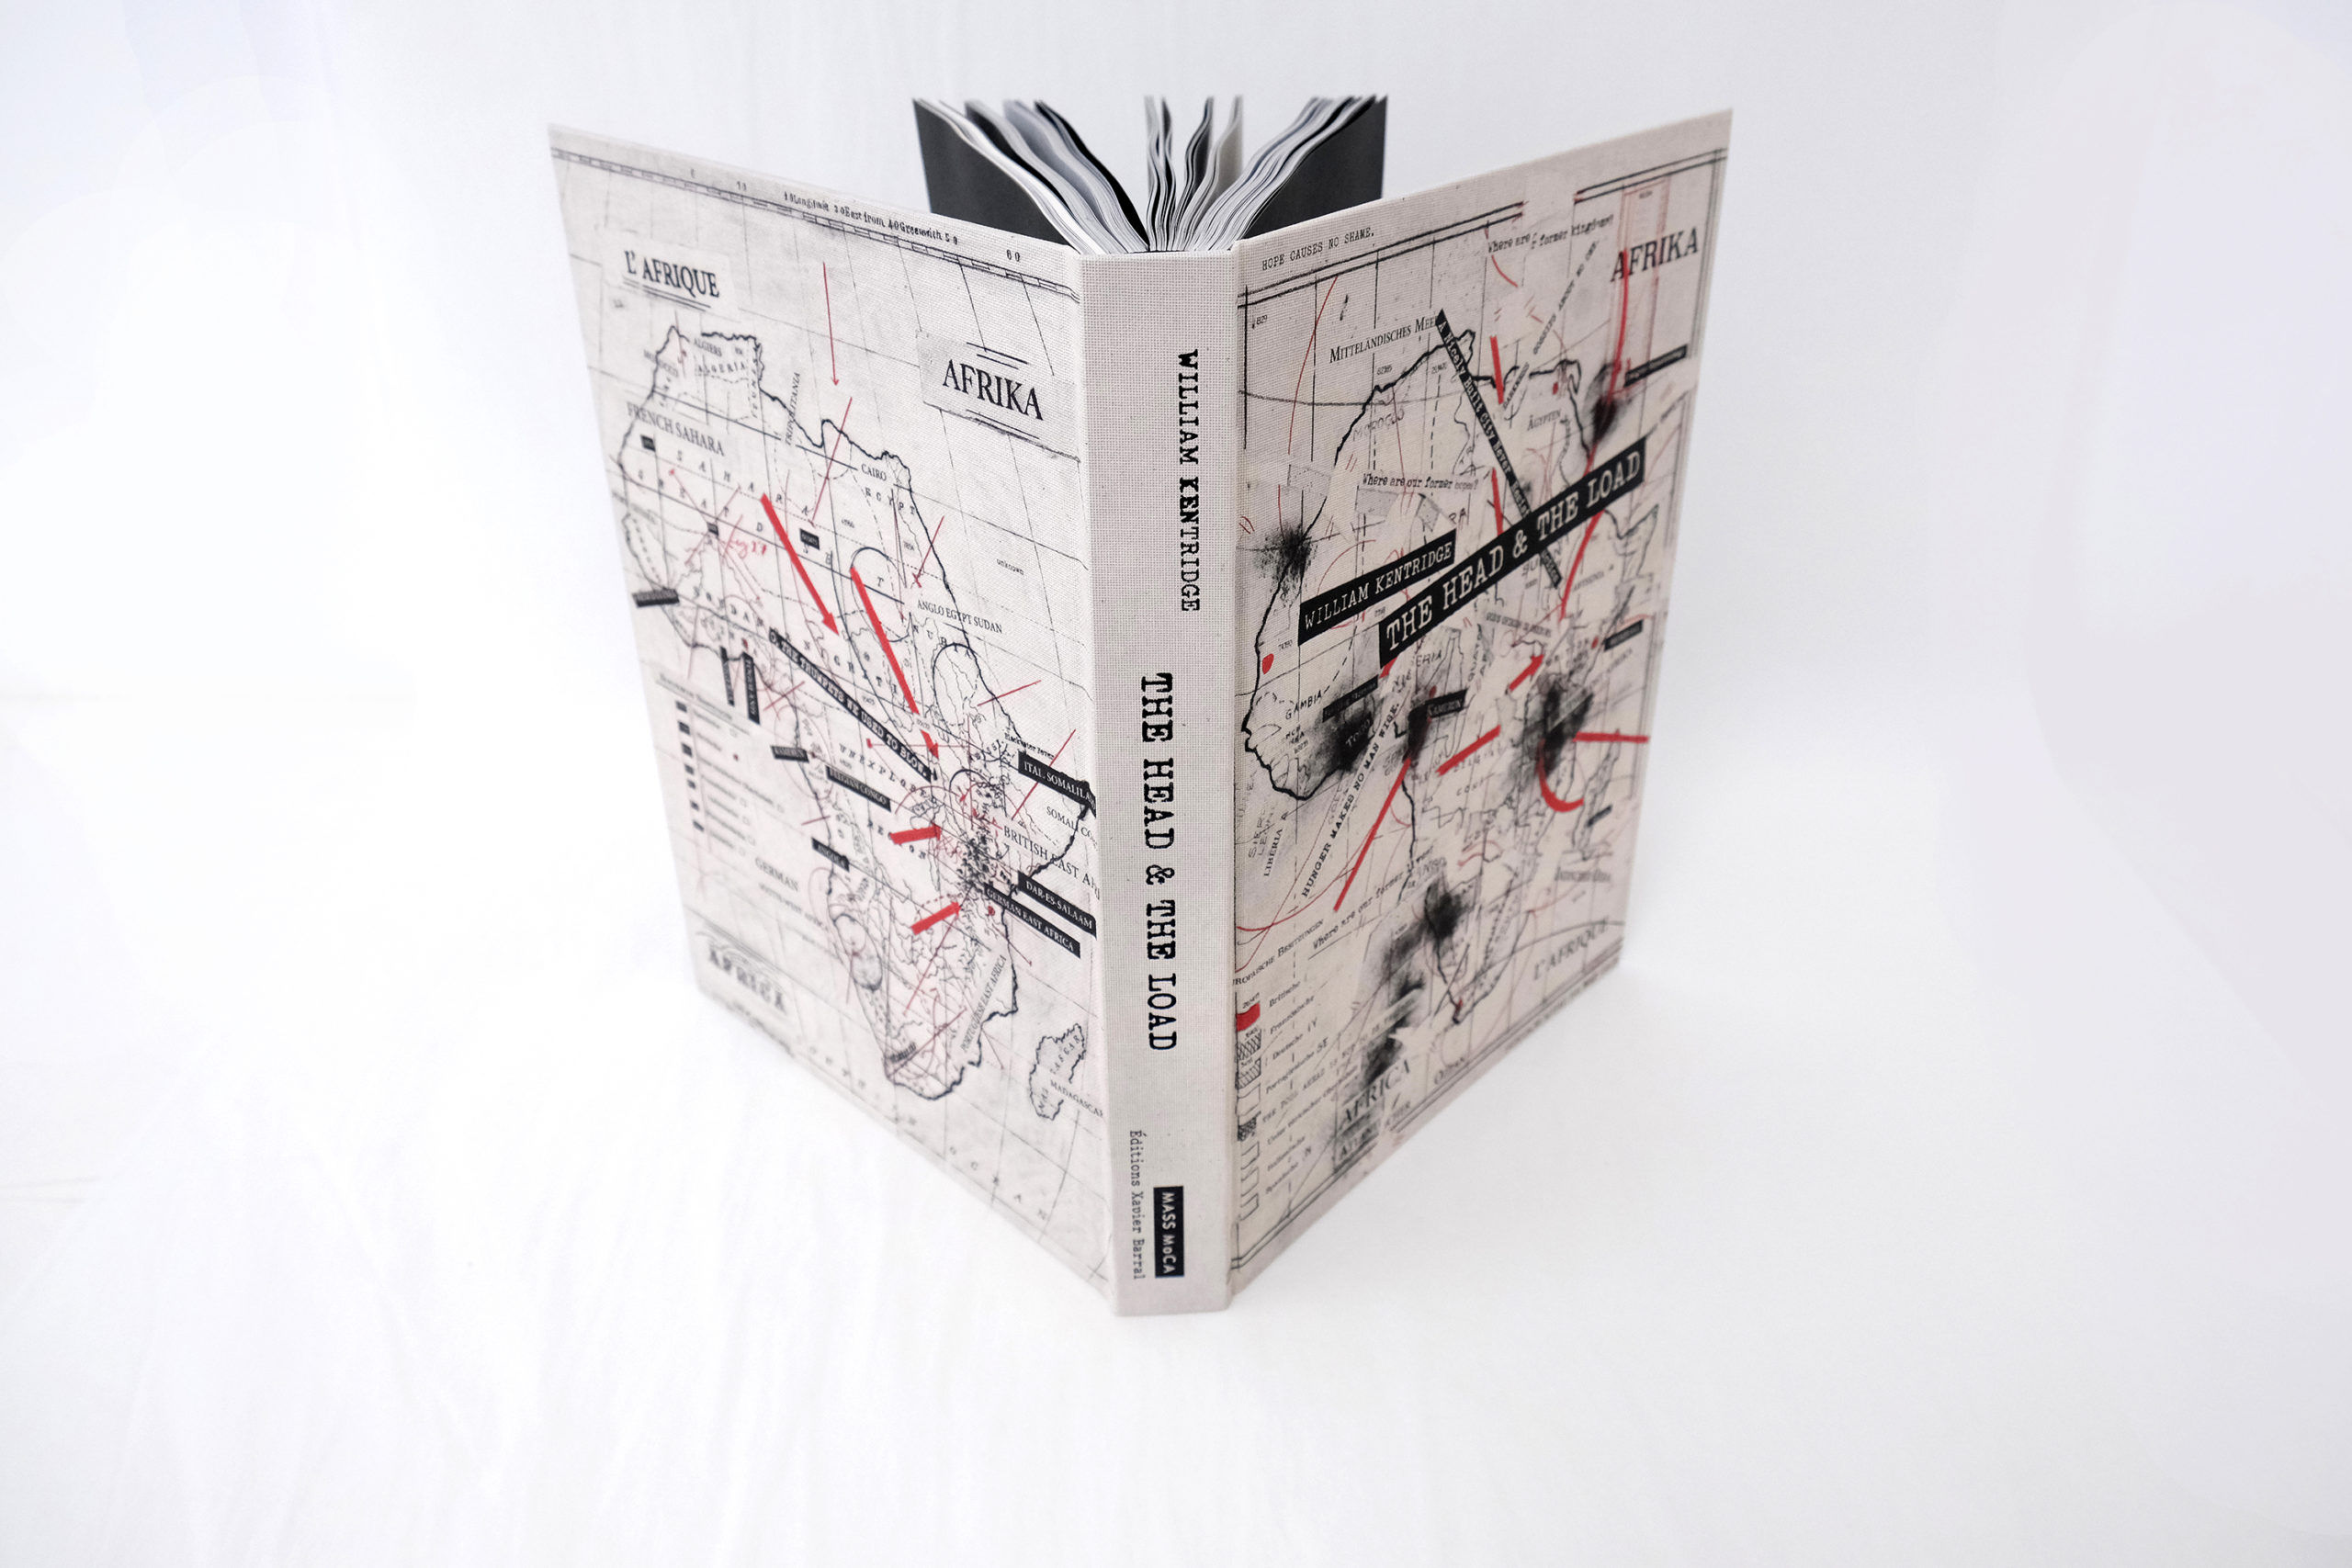 William Kentridge's The Head and the Load book standing up on its spine, open with the cover facing the camera. The cover art is a black and white illustrated map of Africa with black text labels and red arrows pointing to areas on the map. The text “The Head and the Load” and “William Kentridge” appears on the spine and the front cover.